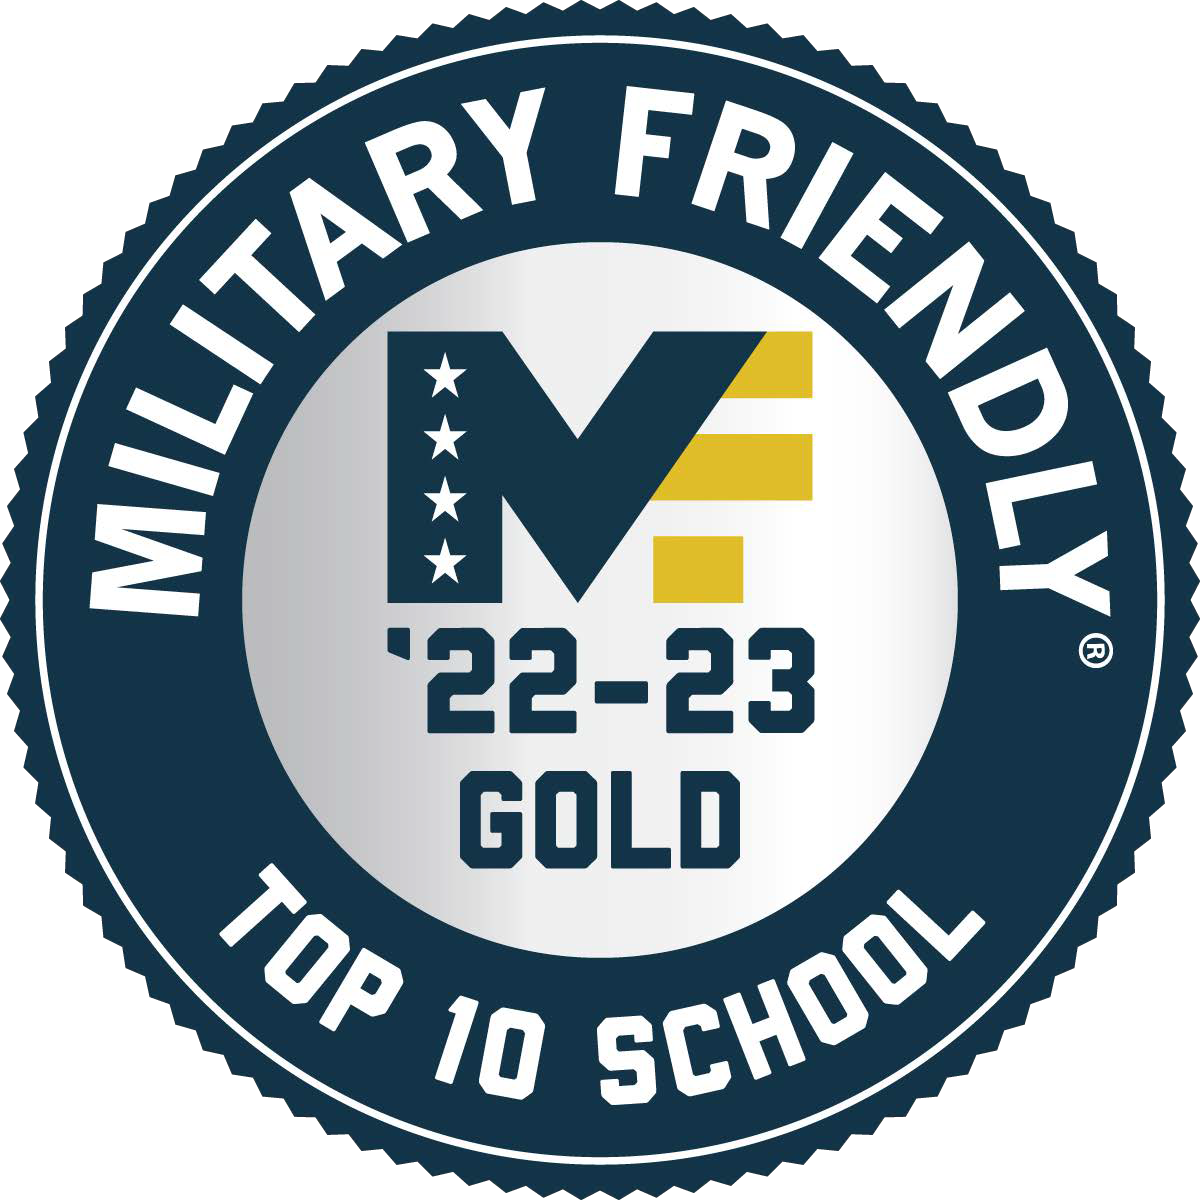 Military Friendly 22 23 Top10